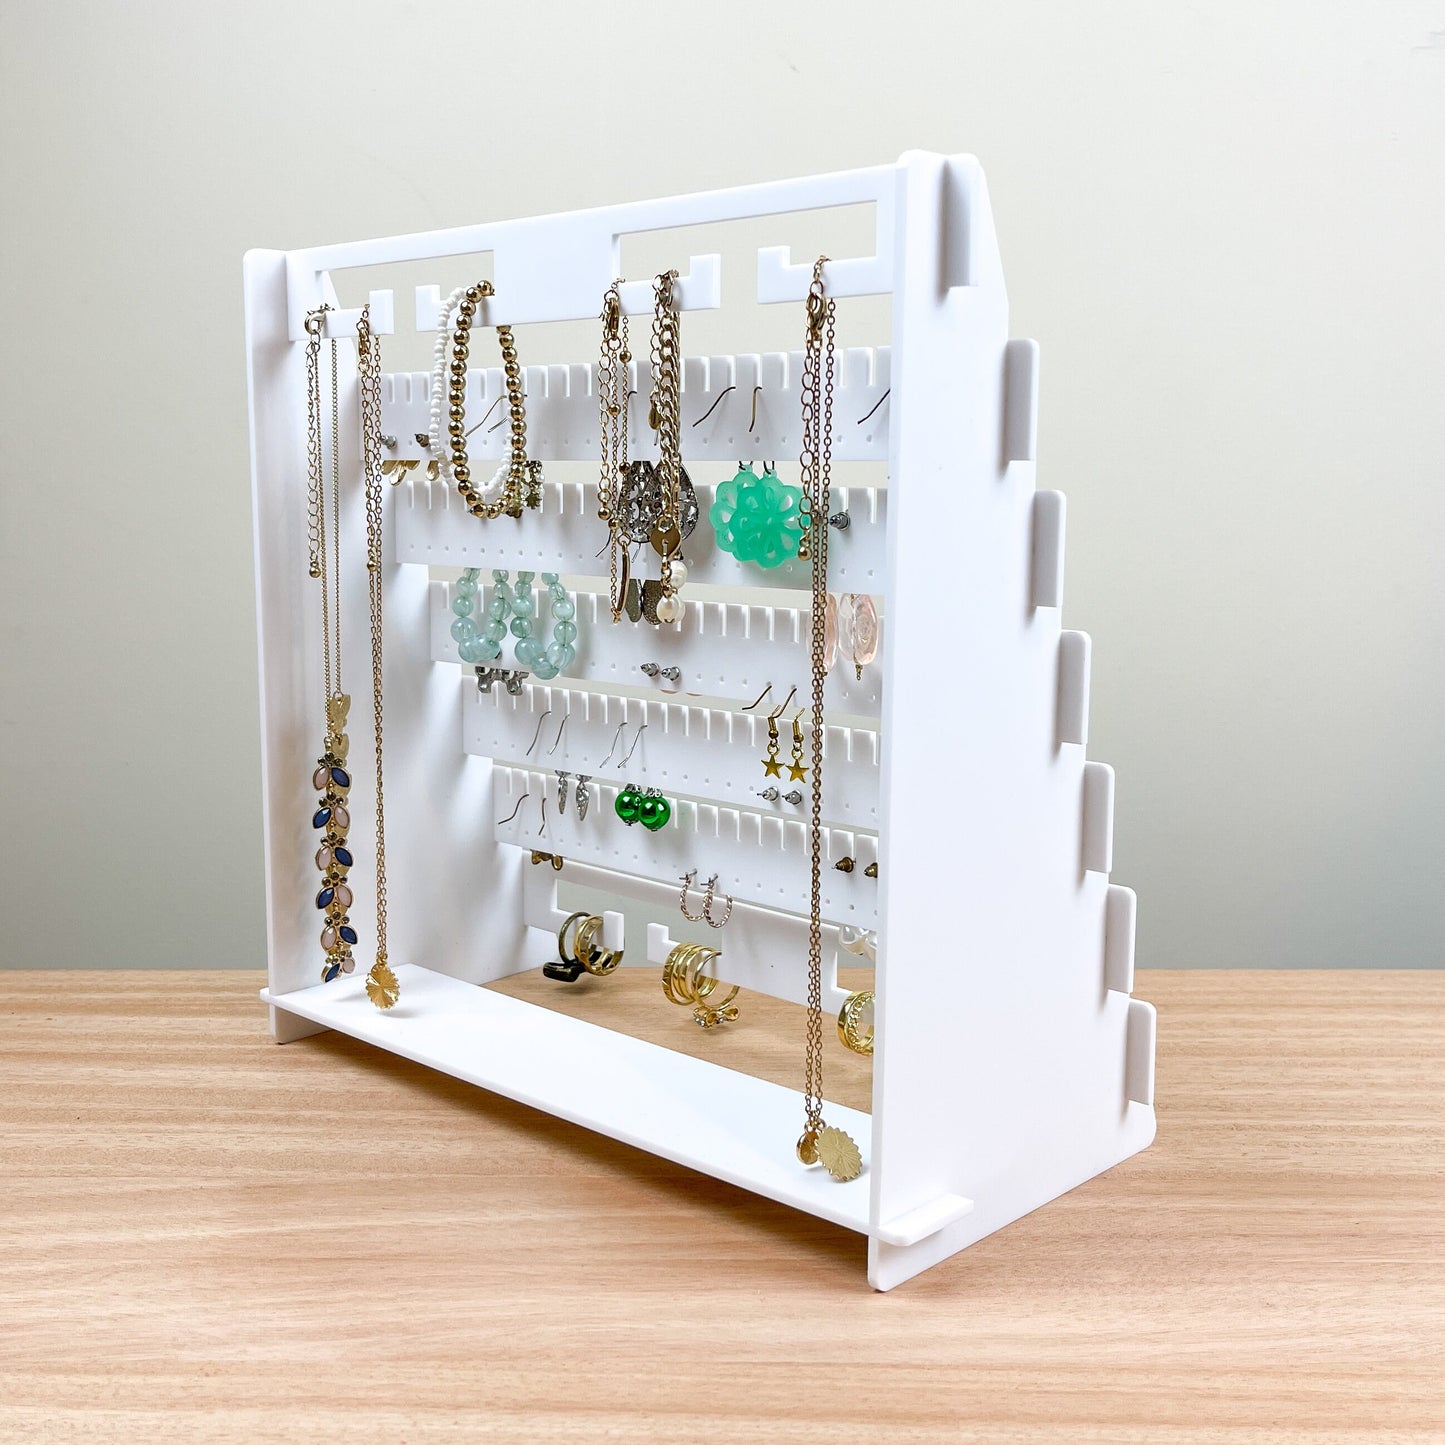 Customisable Jewellery Holder - Large Acrylic Earring Holder & Necklace Stand | White, Black, Frosted